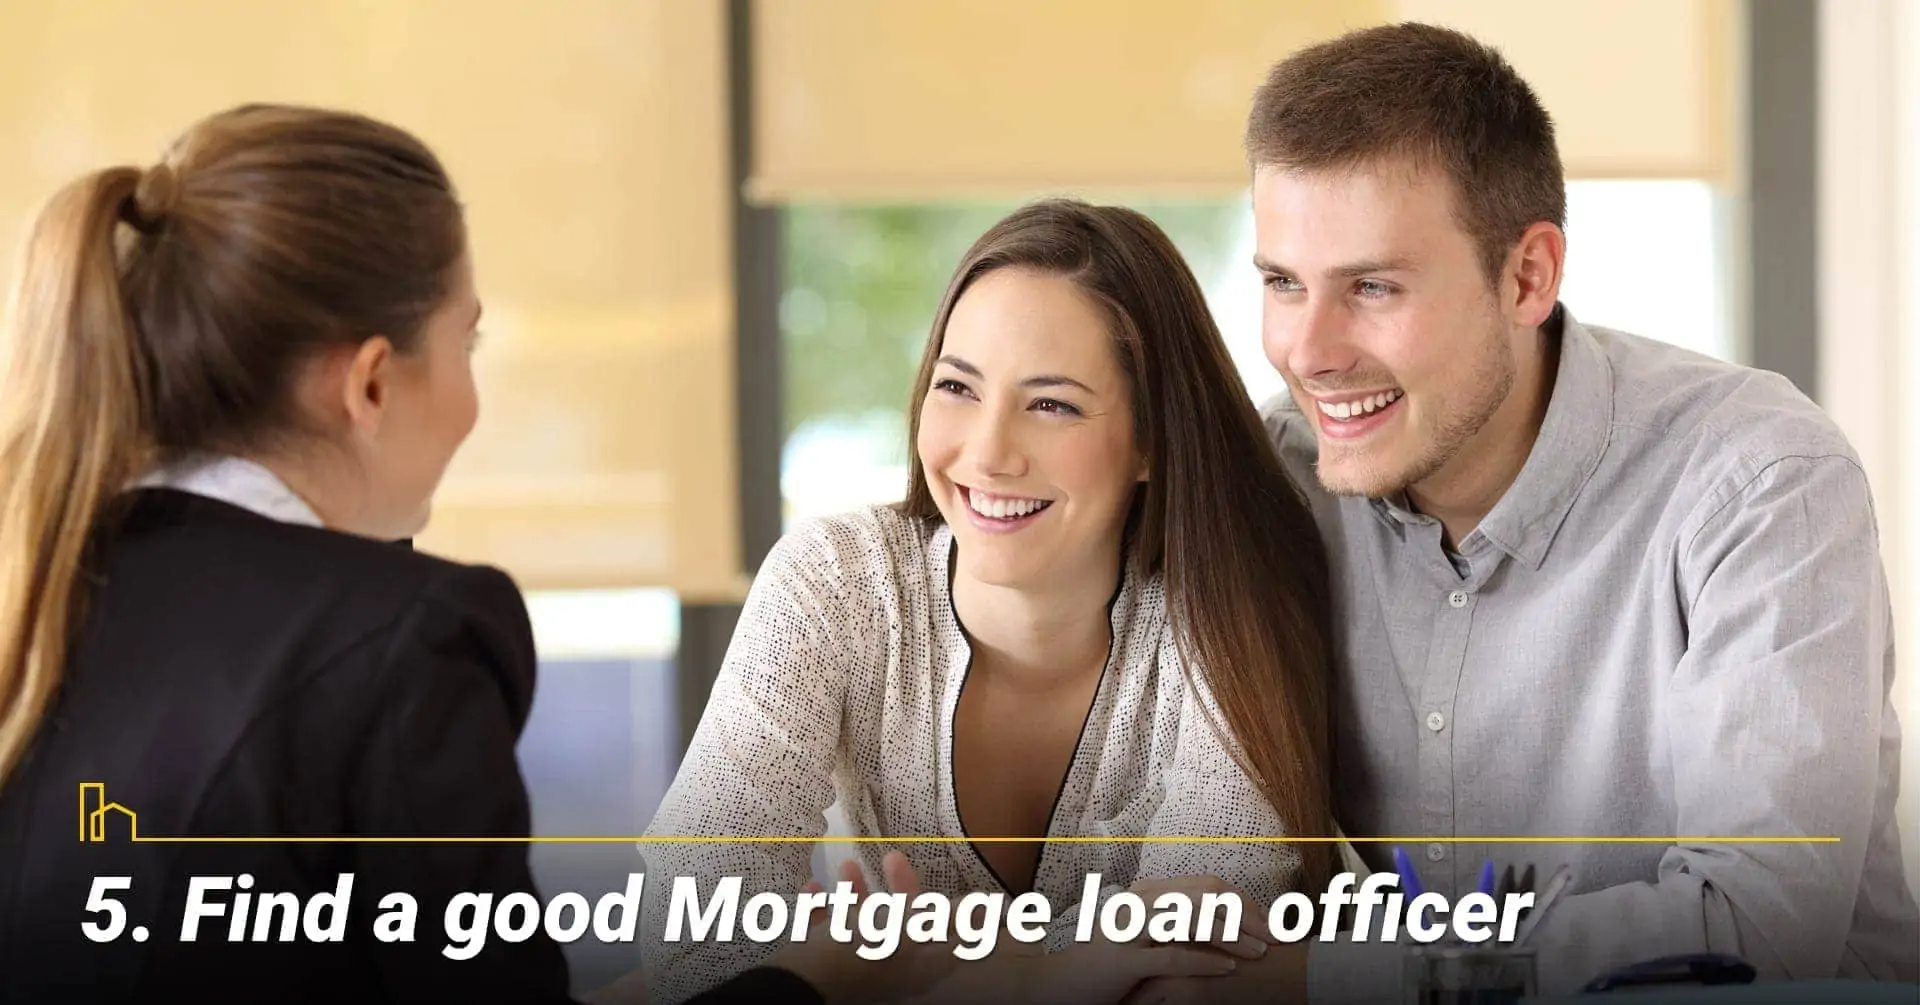 Find a good Mortgage loan officer, a good Mortgage loan officer is important